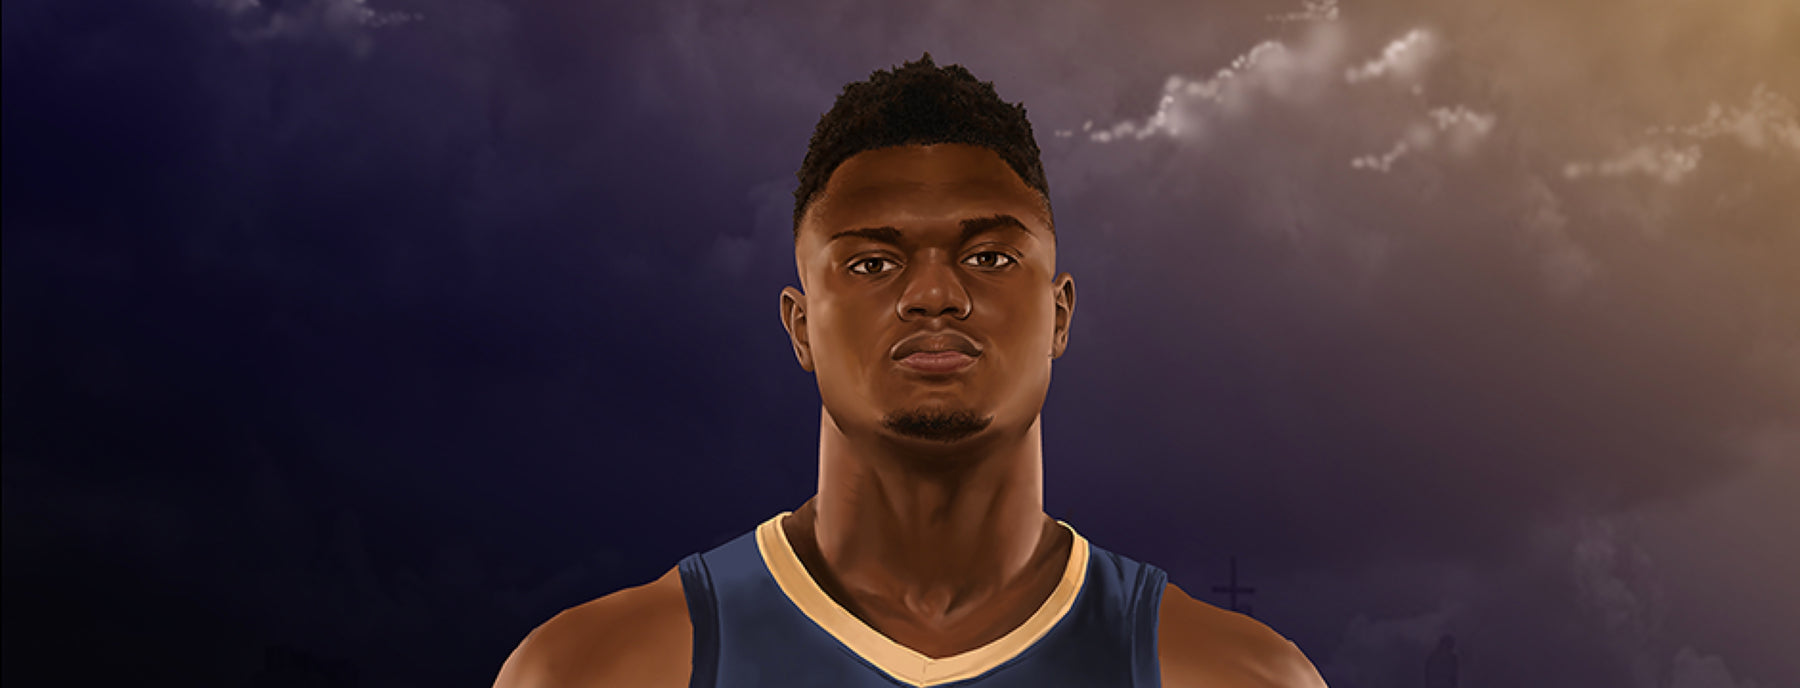 Zion Williamson standing in front of stormy skies.